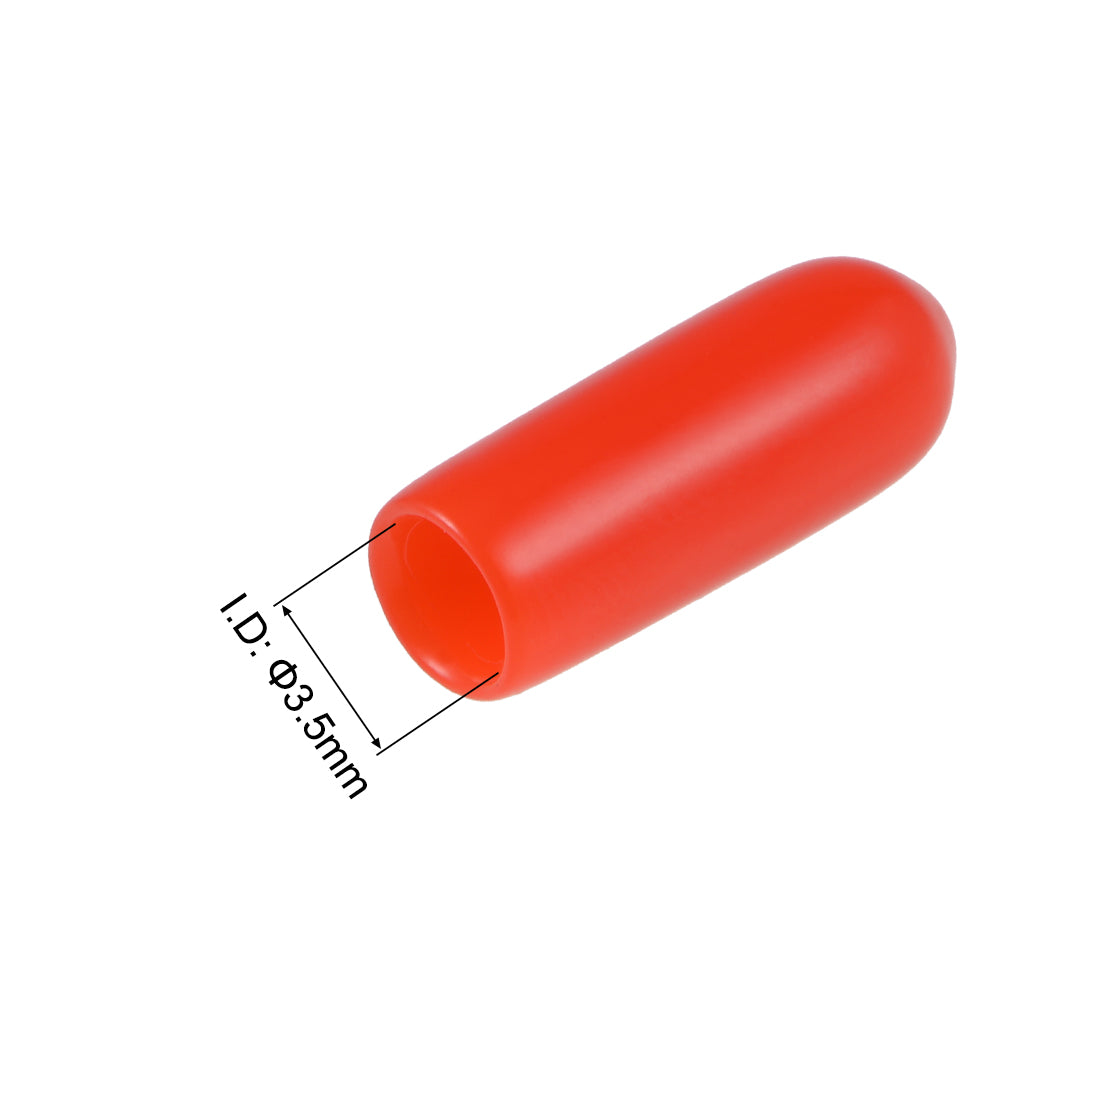 uxcell Uxcell 80pcs Rubber End Caps 3.5mm ID 15mm Height Screw Thread Protectors Red